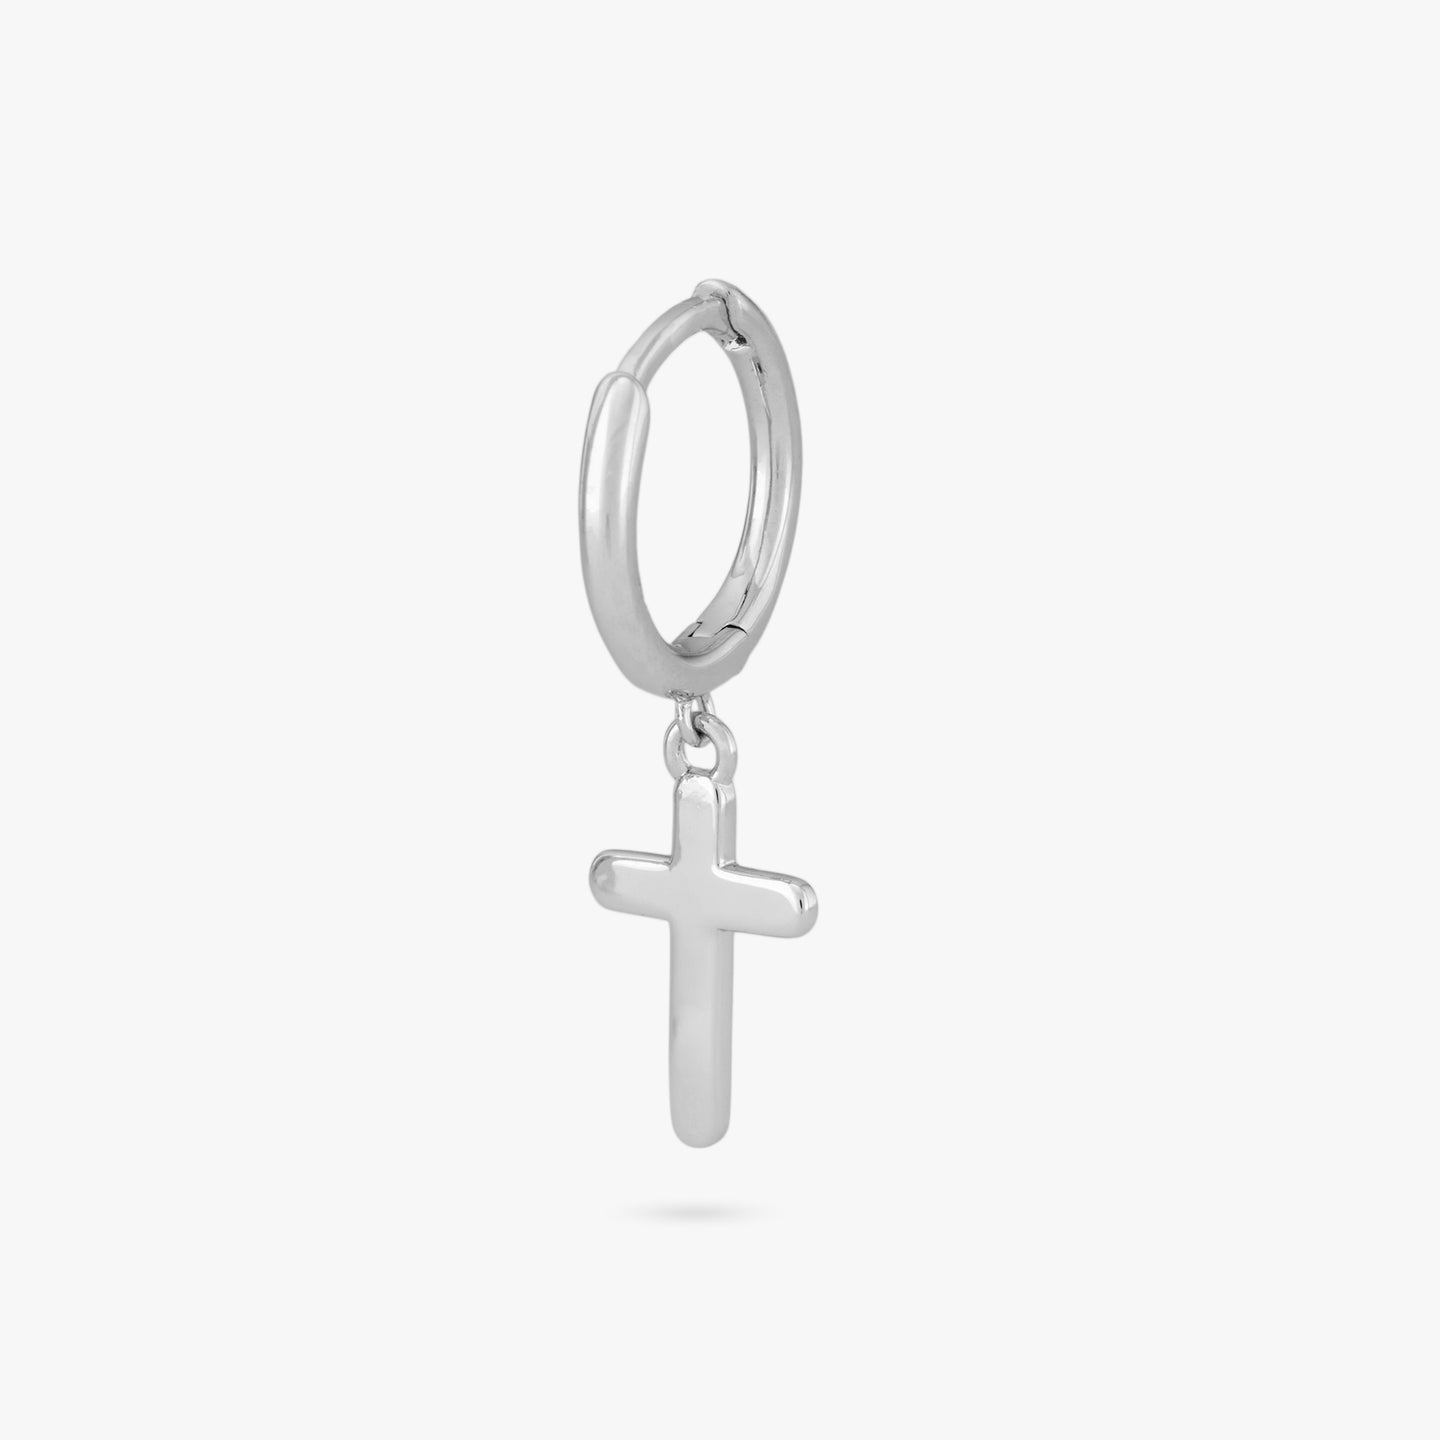 This is a small silver huggie with a cross charm dangle color:null|silver